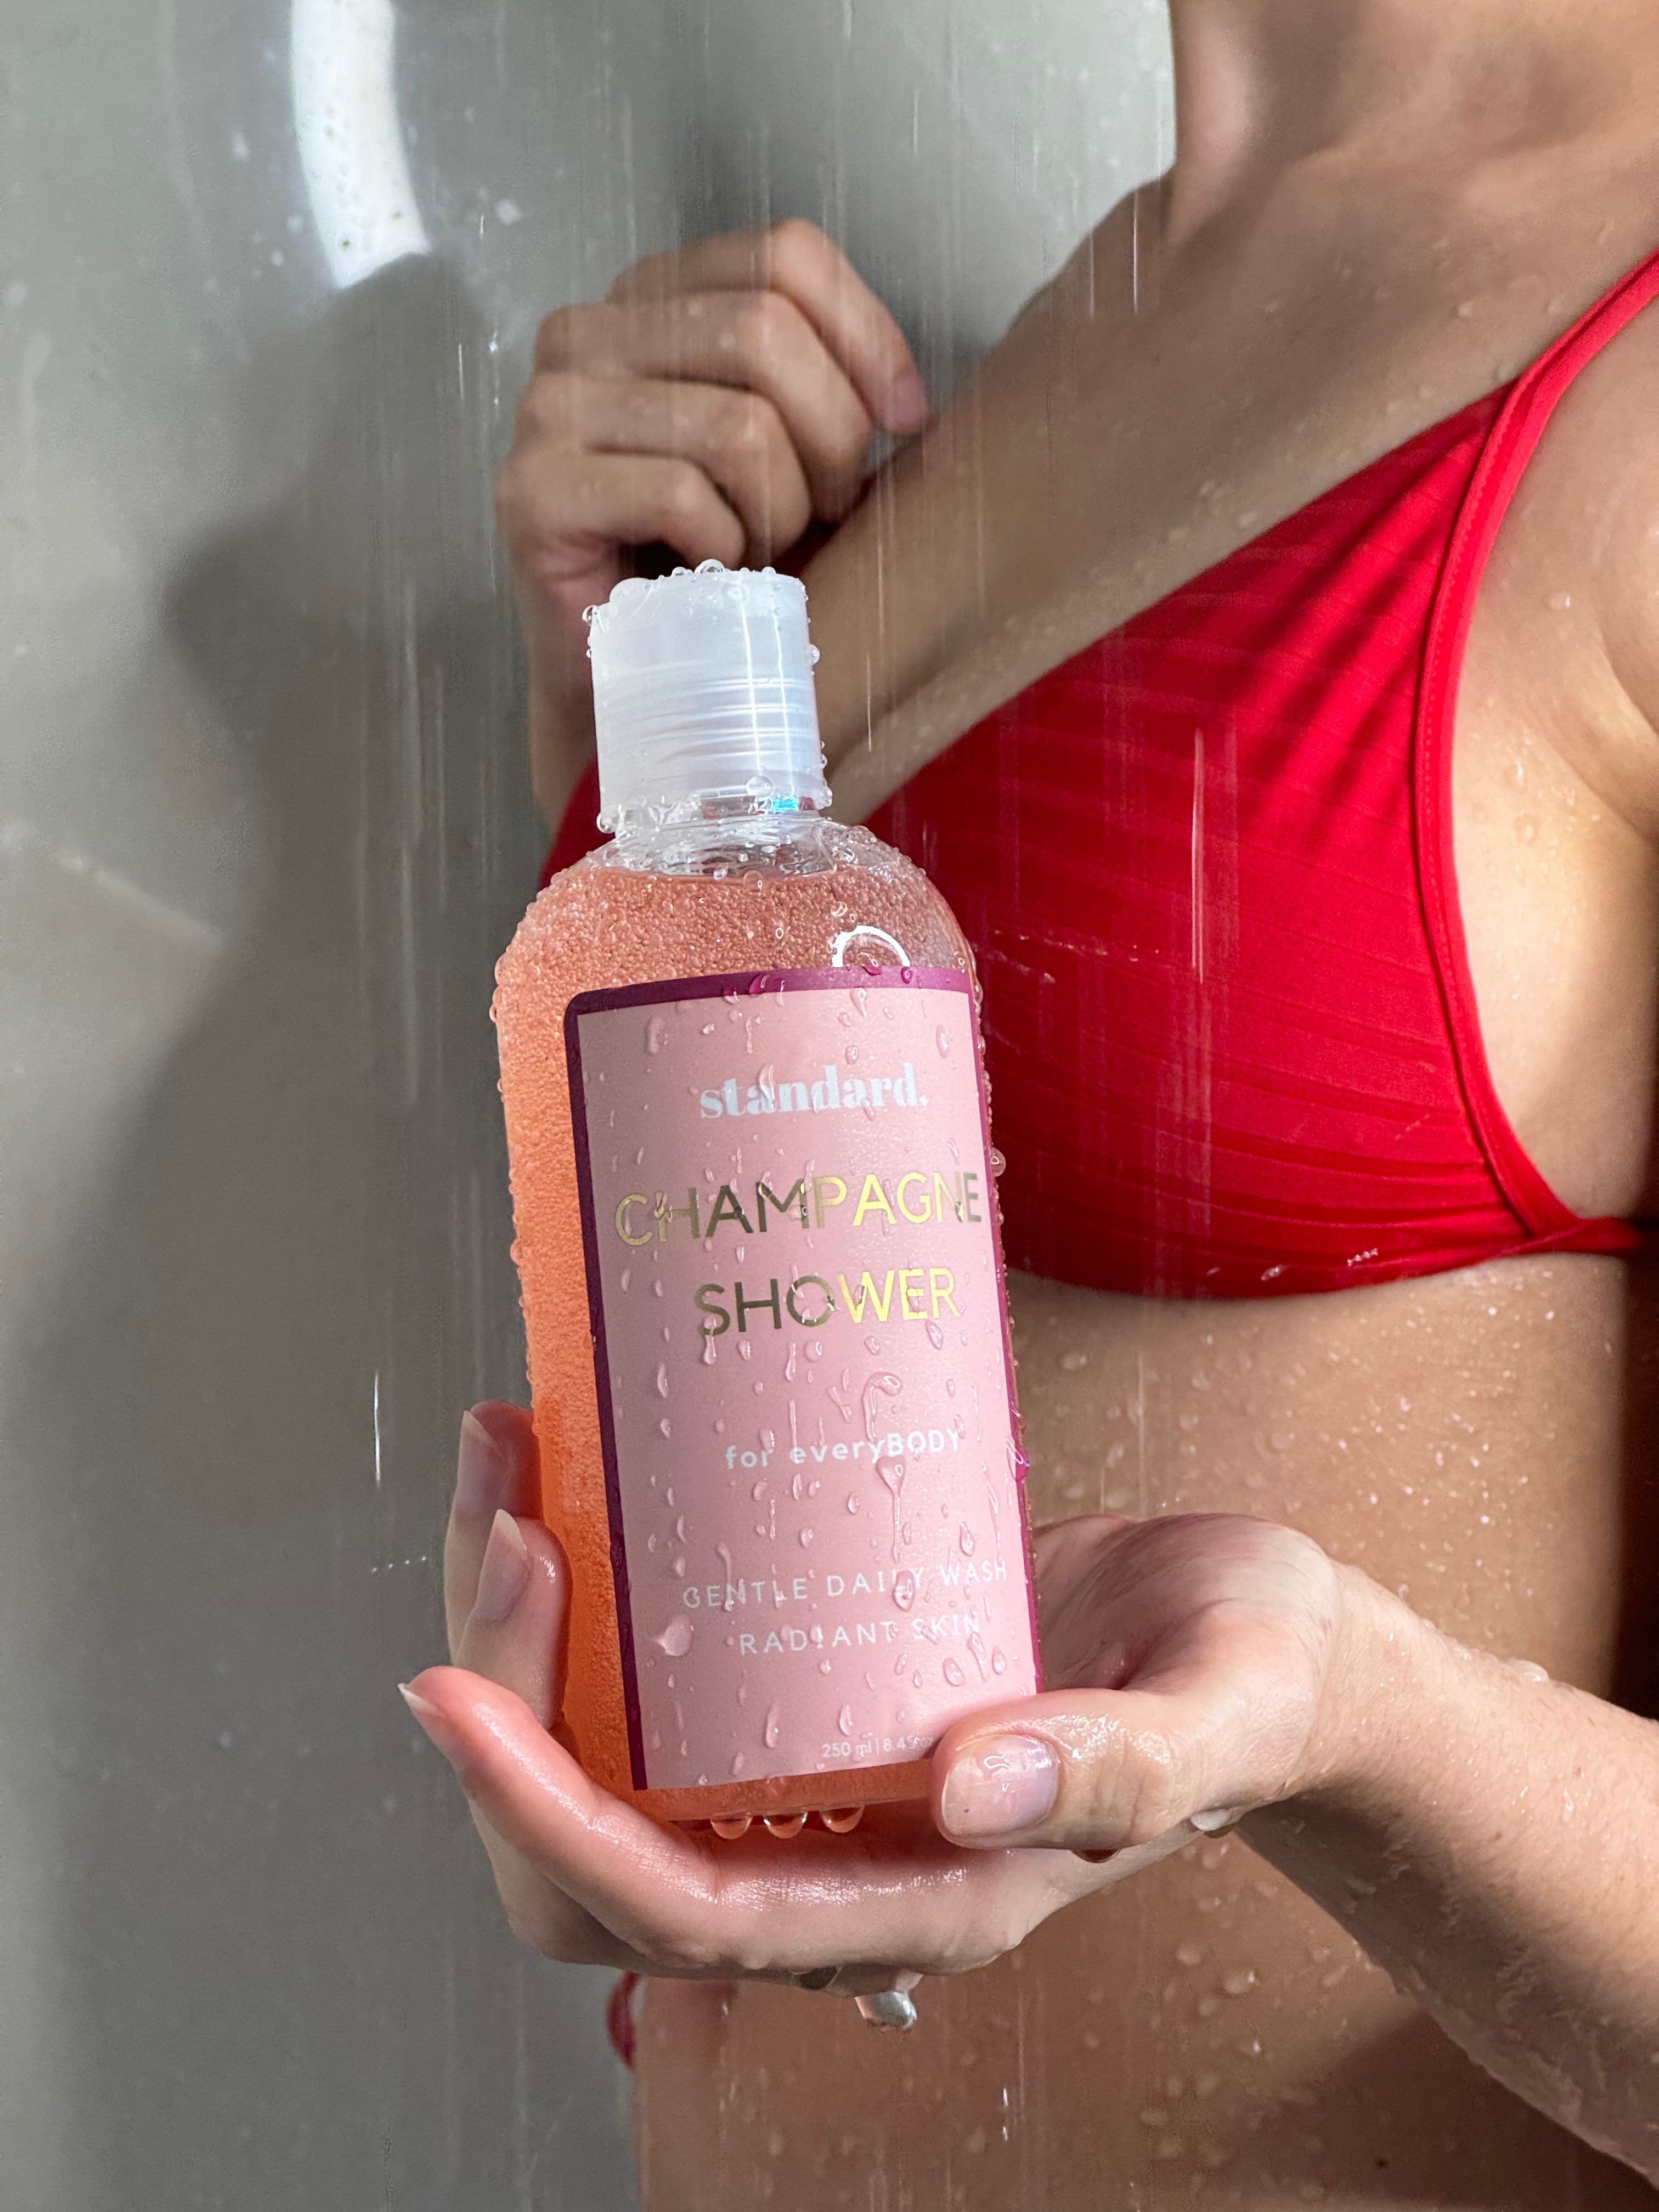 Champagne Shower Limited Edition Body Wash